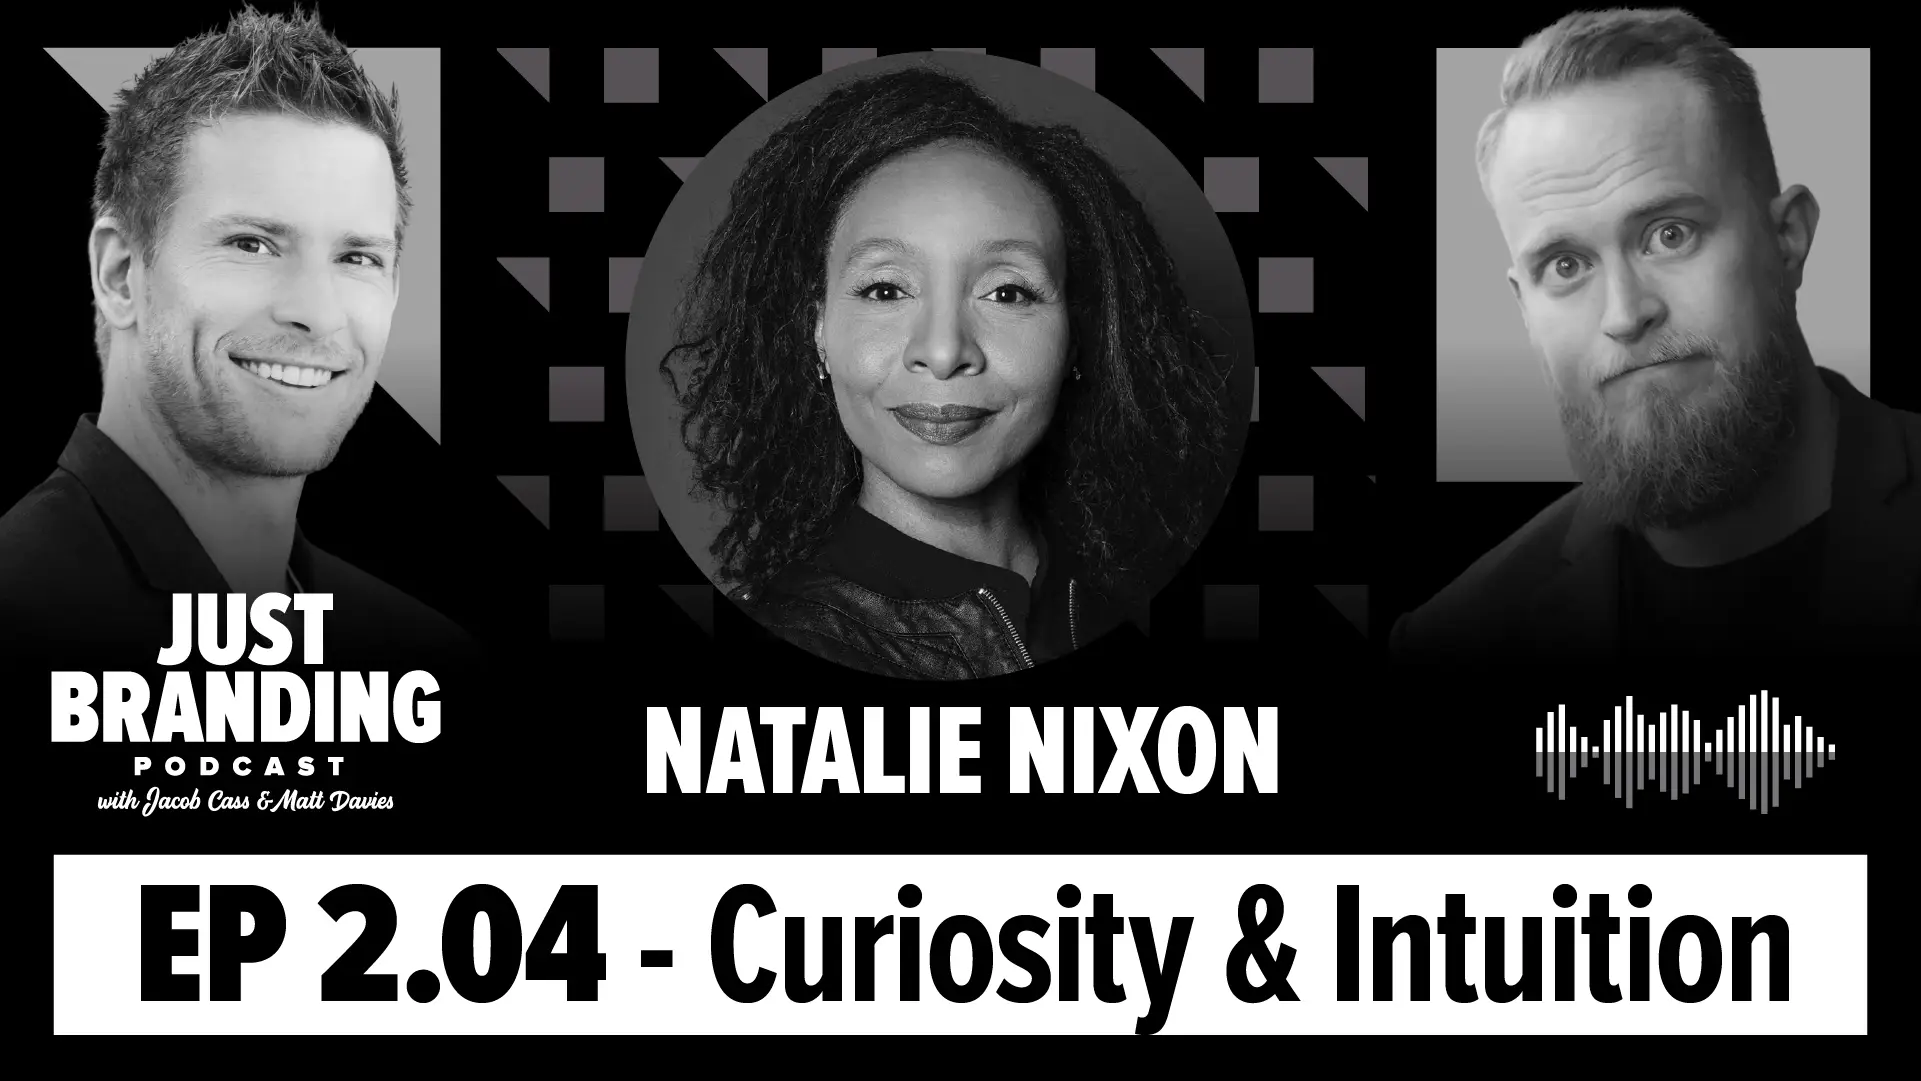 How to Use Curiosity, Improvisation & Intuition to Create More Value with Natalie Nixon